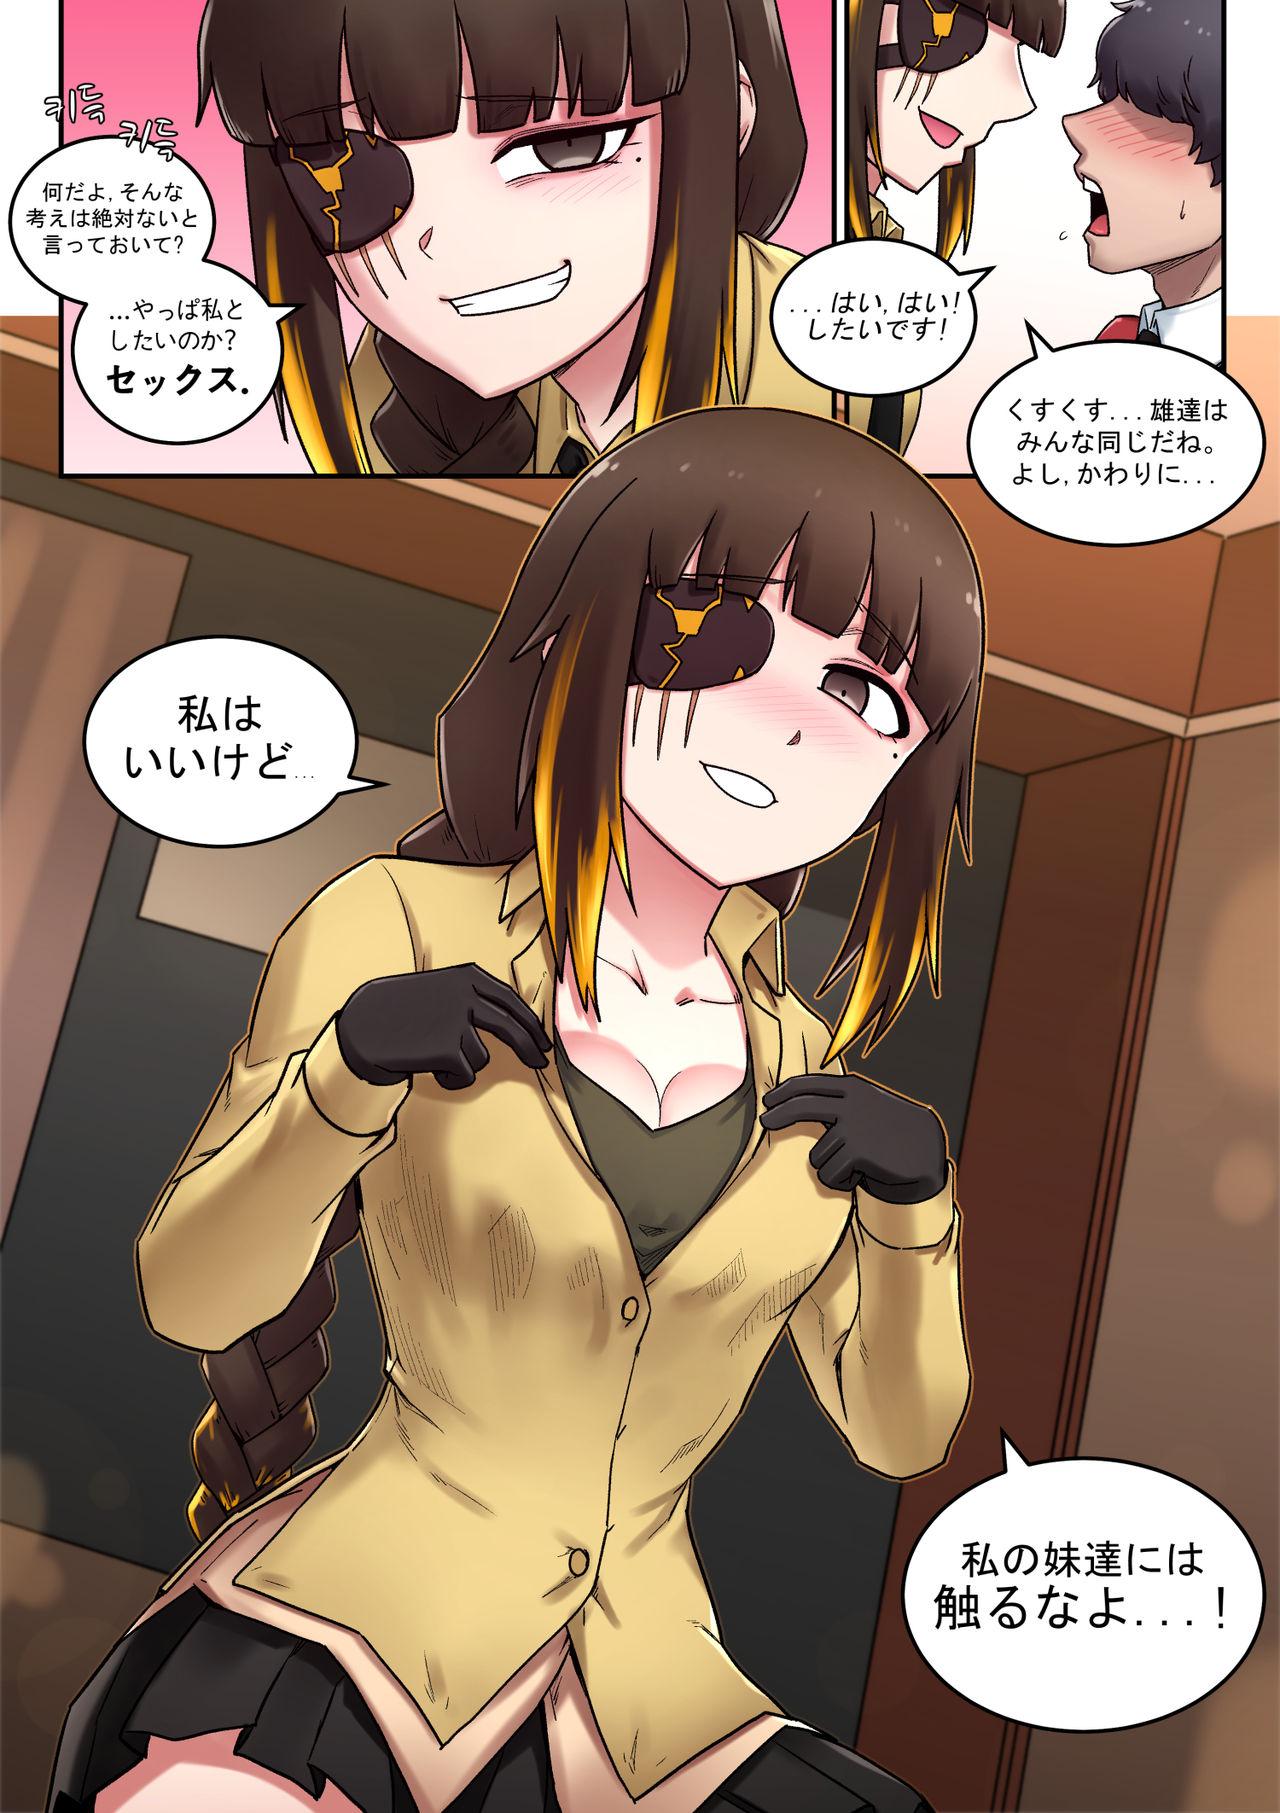 Groupsex M16 COMIC - Girls frontline Eat - Page 5